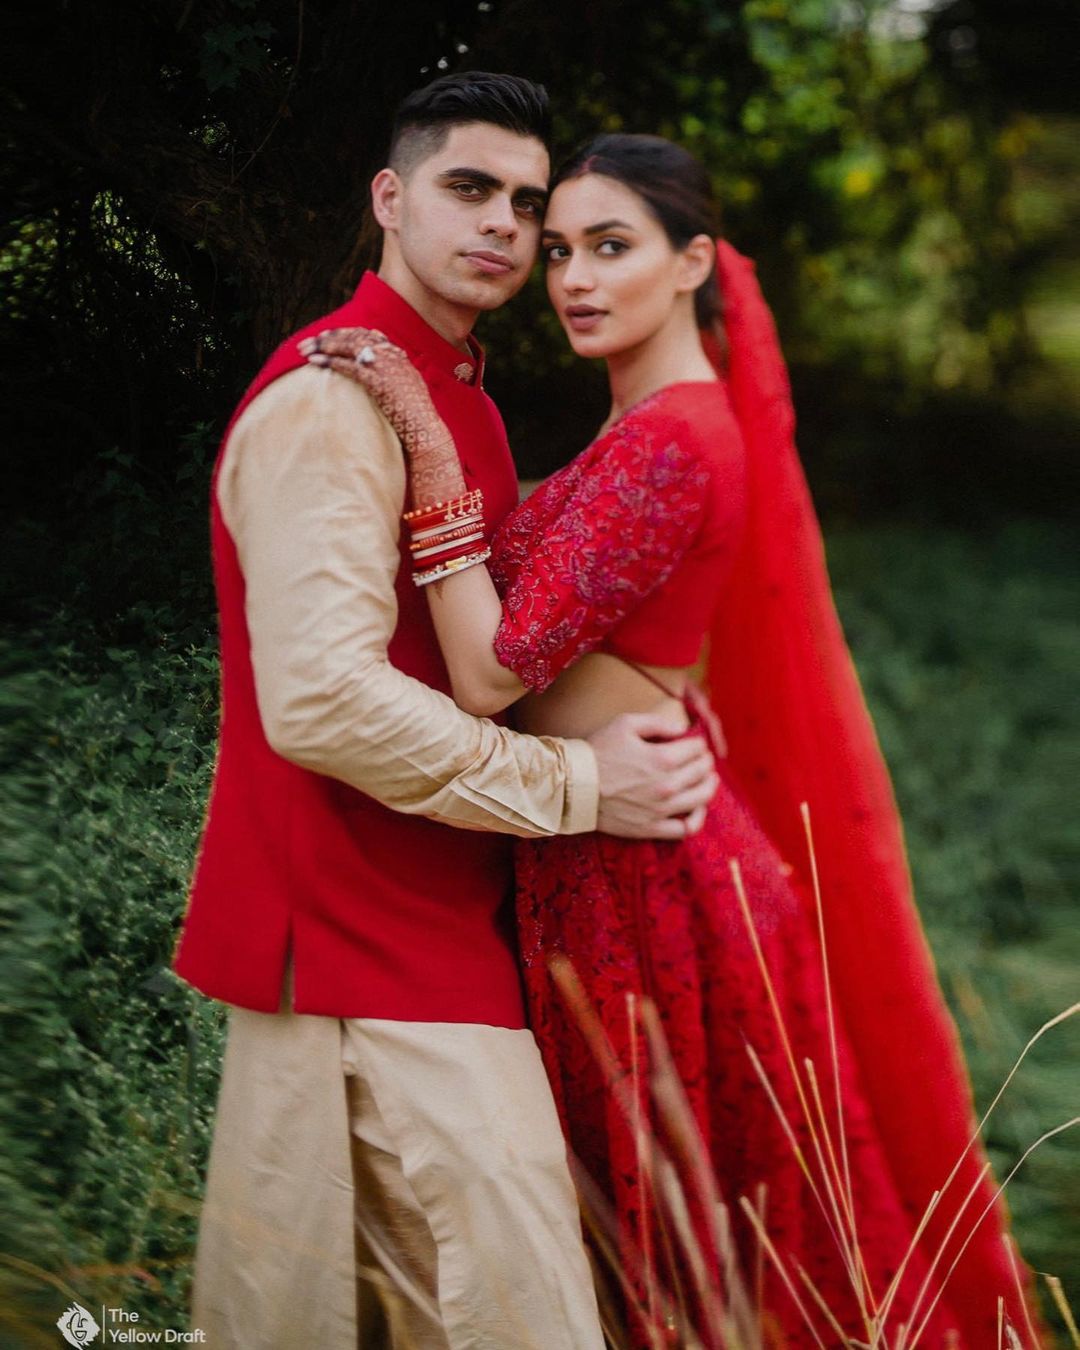 Smashing Patriarchy: Here's How This Groom Is Changing Archaic Wedding ...